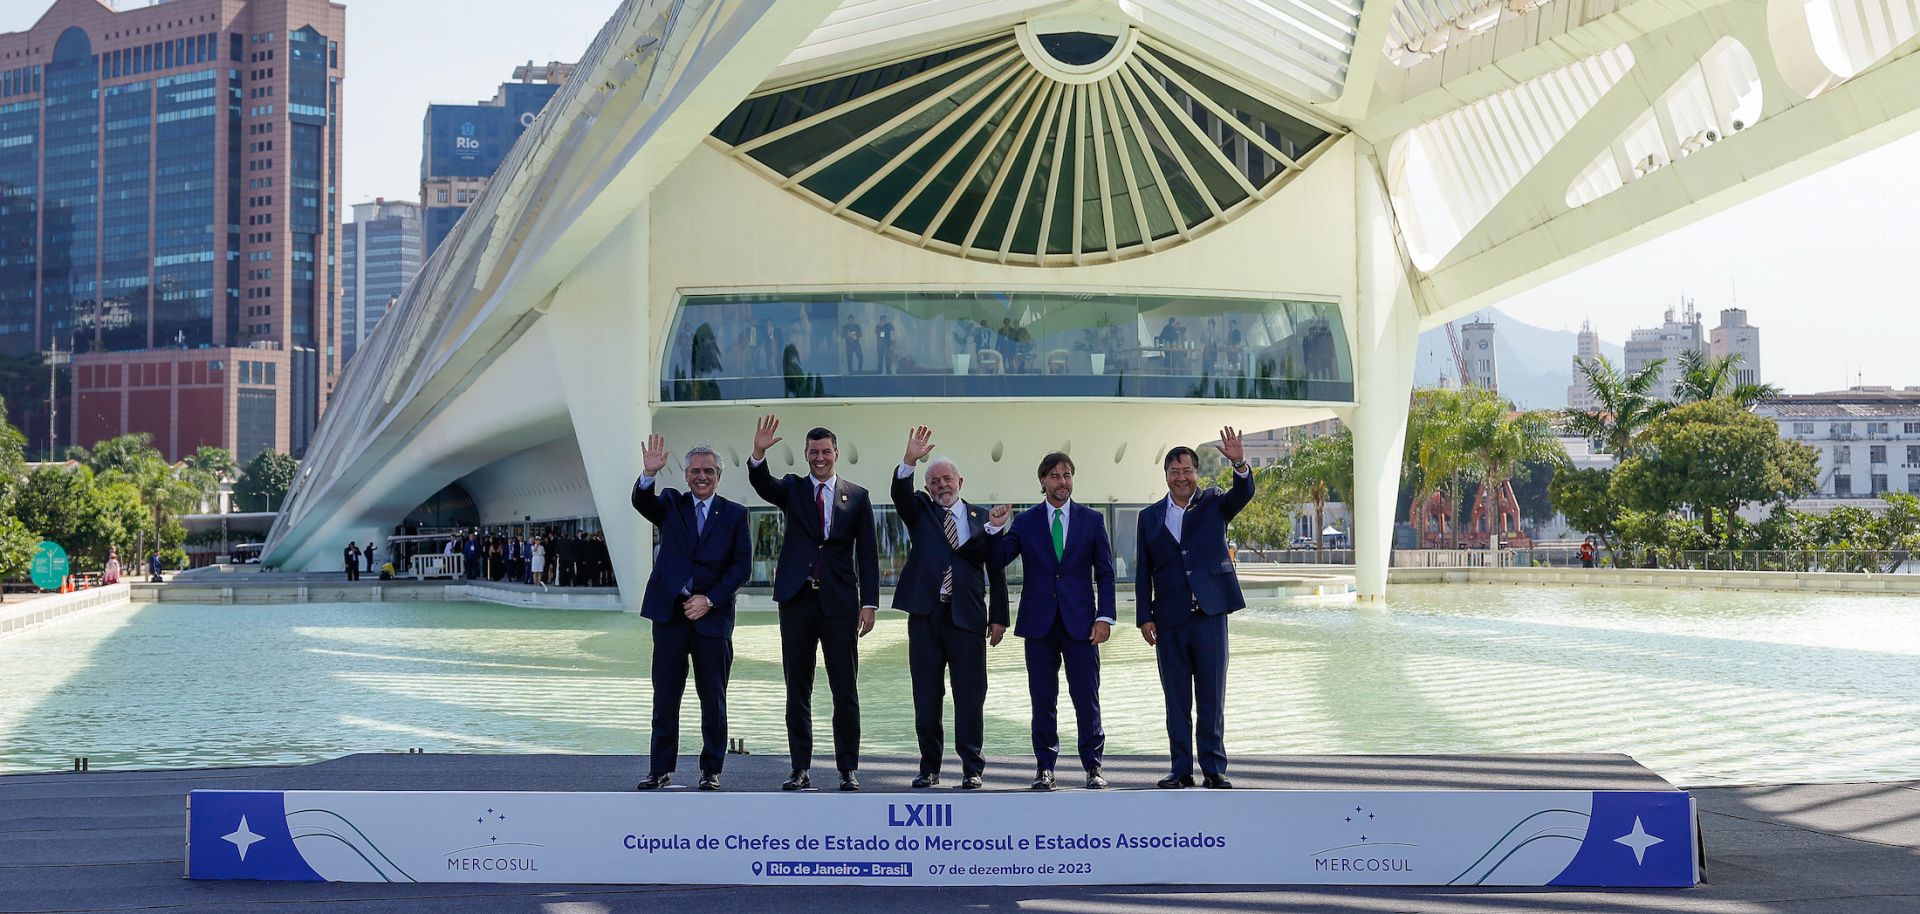 (From left to right) The presidents of Argentina, Paraguay, Brazil, Uruguay and Bolivia pose for photographs during the annual Mercosur leadership summit on Dec. 7, 2023, in Rio de Janeiro, Brazil.